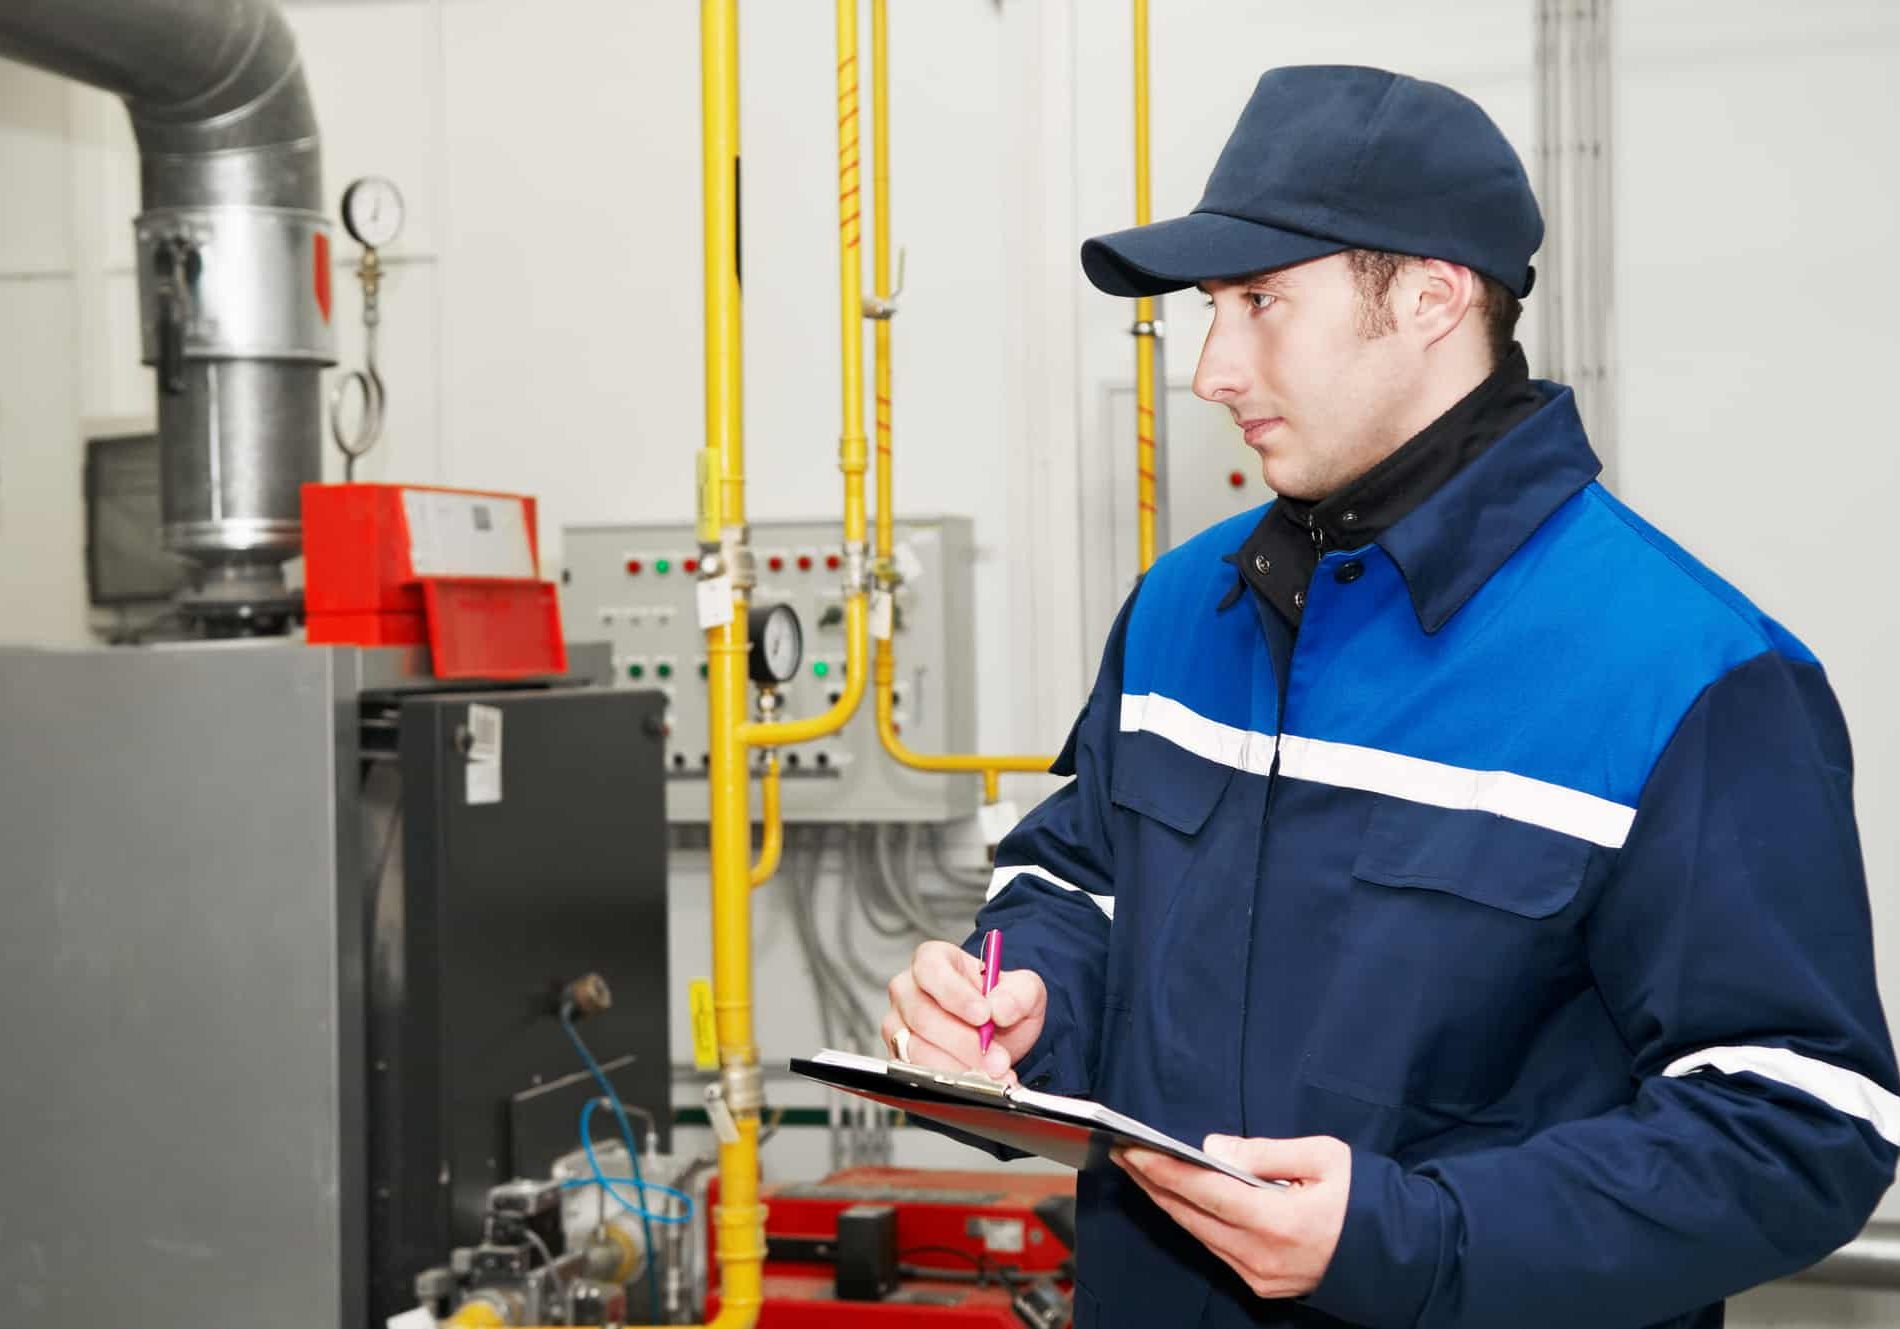 Maintenance engineer checking technical data of heating system equipment in a boiler room